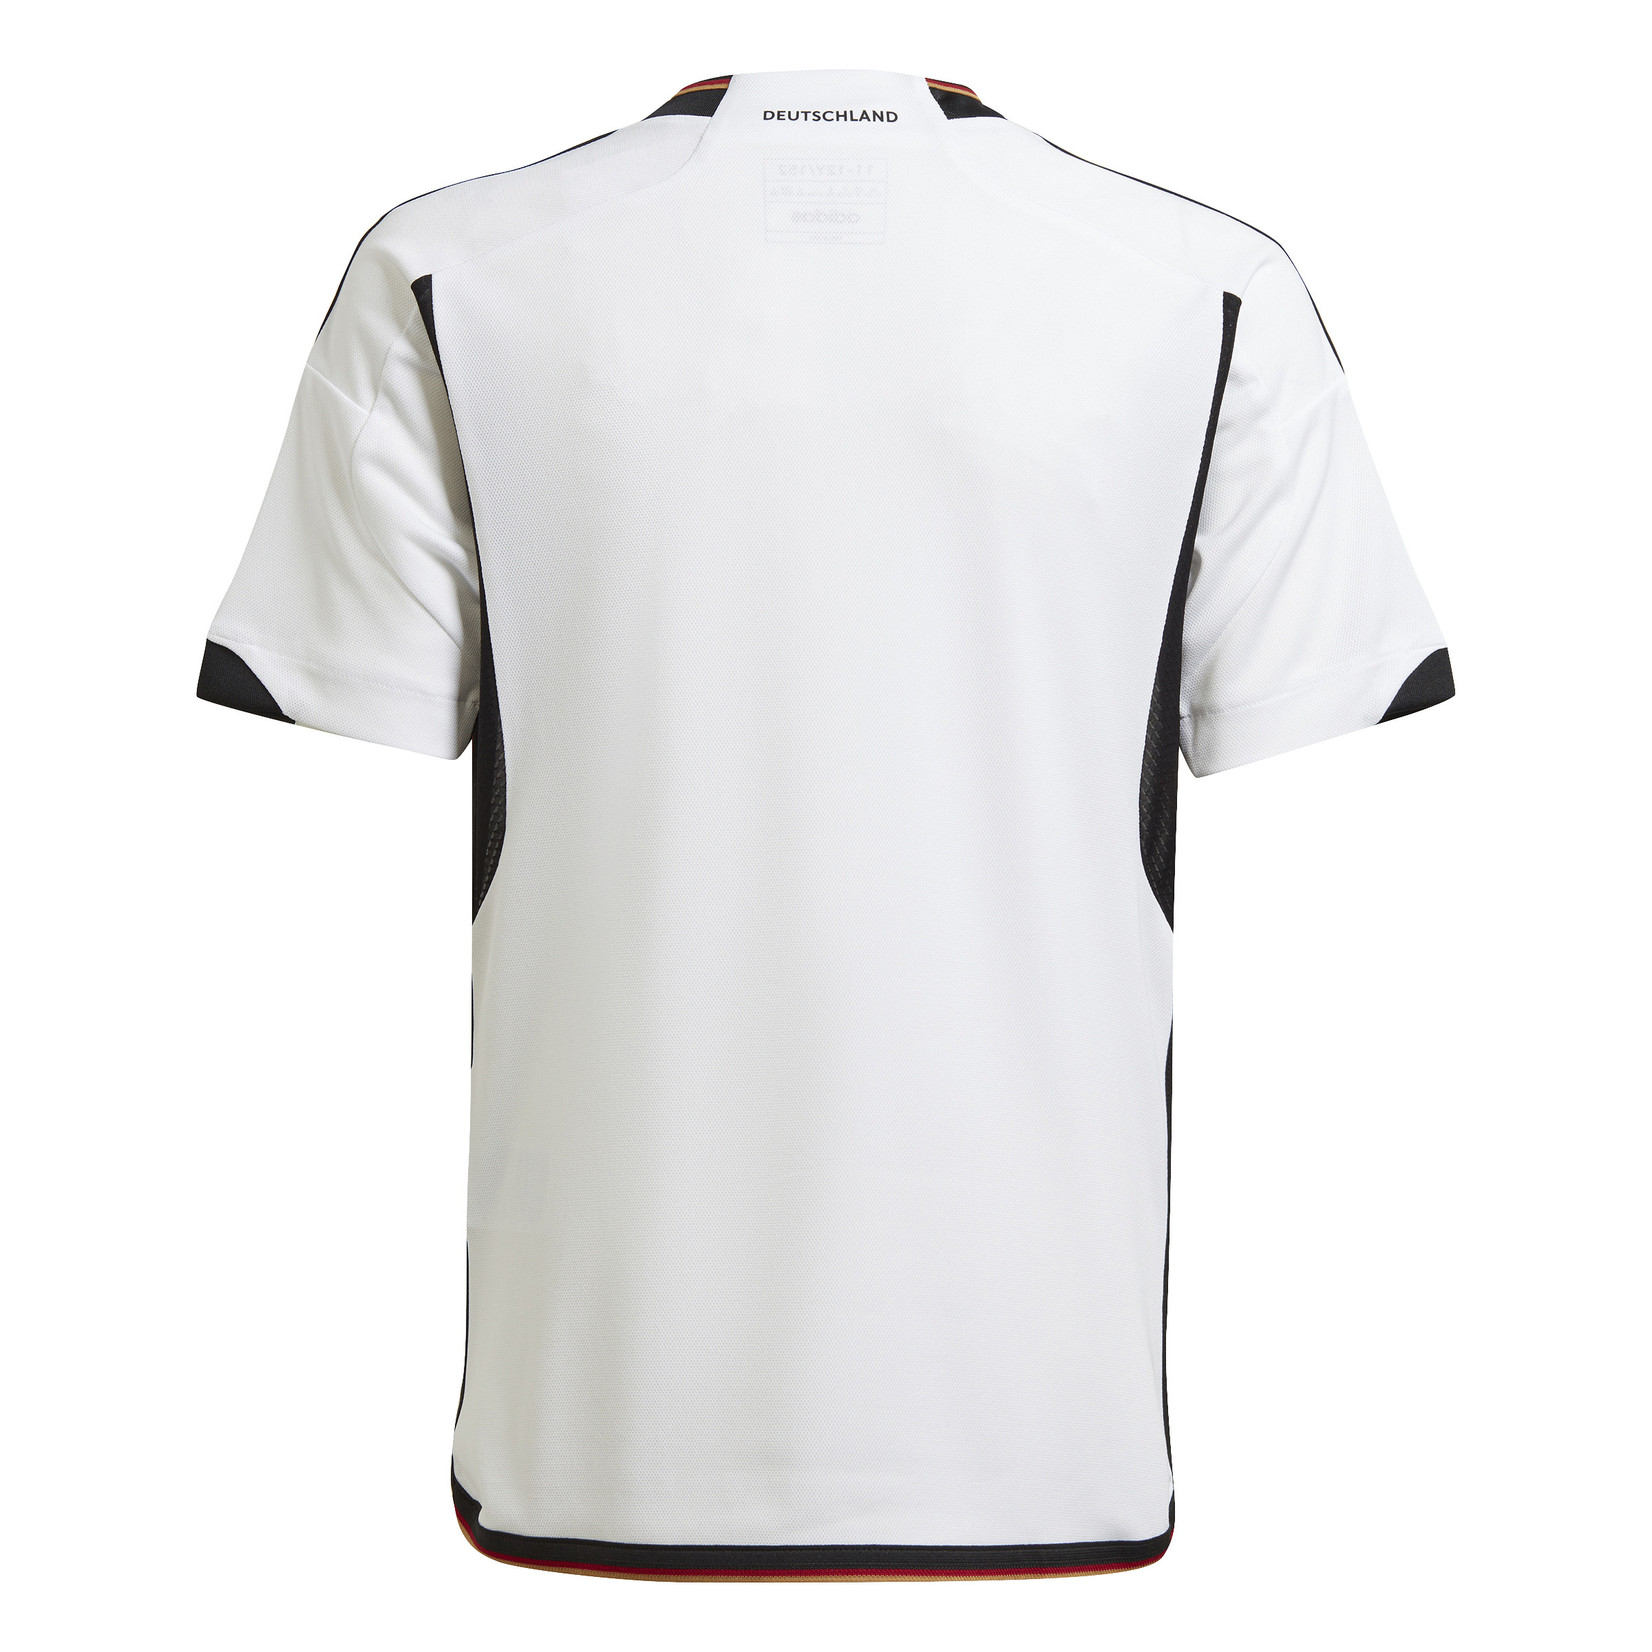 Adidas Germany 22 Home Jersey White XS Mens